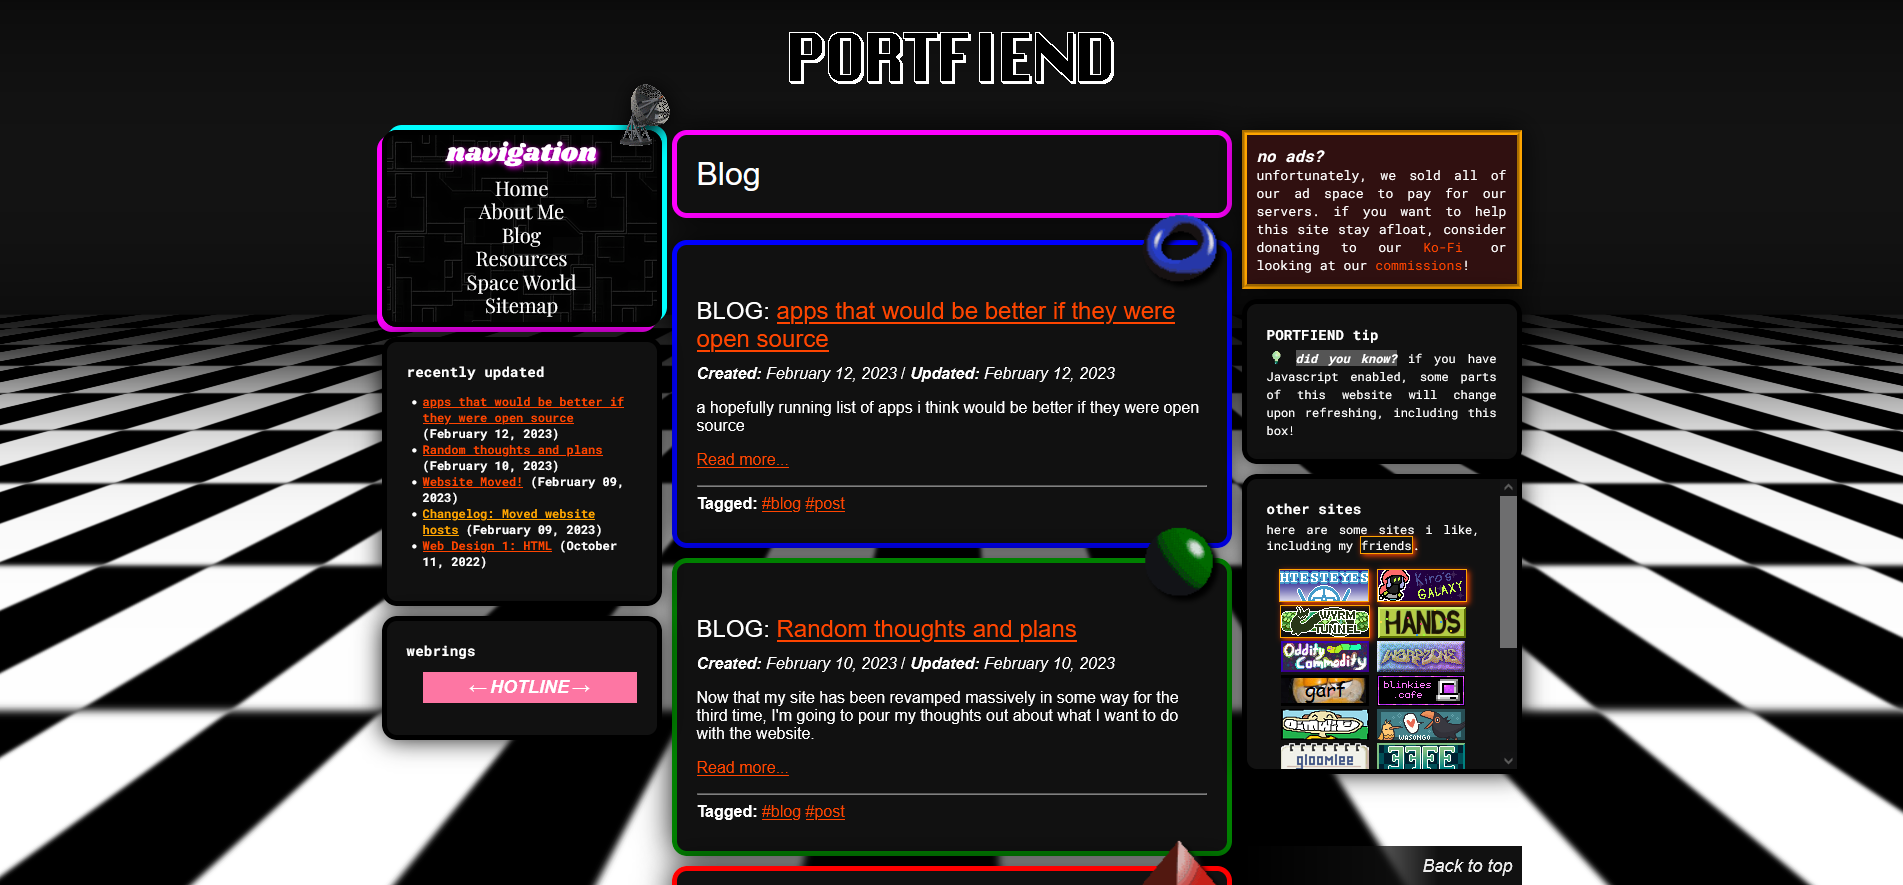 A screenshot of PORTFIEND's future "blog" directory. There are multiple containers in the sidebars, each hosting different content such as navigation, website buttons, webrings, fun facts, and a "recently updated pages" section. The blog directory shows short previews of each blog post in recently-created order. The background of the site consists of a 3D checkerboard floor fading off into the horizon. Gifs and bright-colored borders decorate the main content and sidebar content containers.